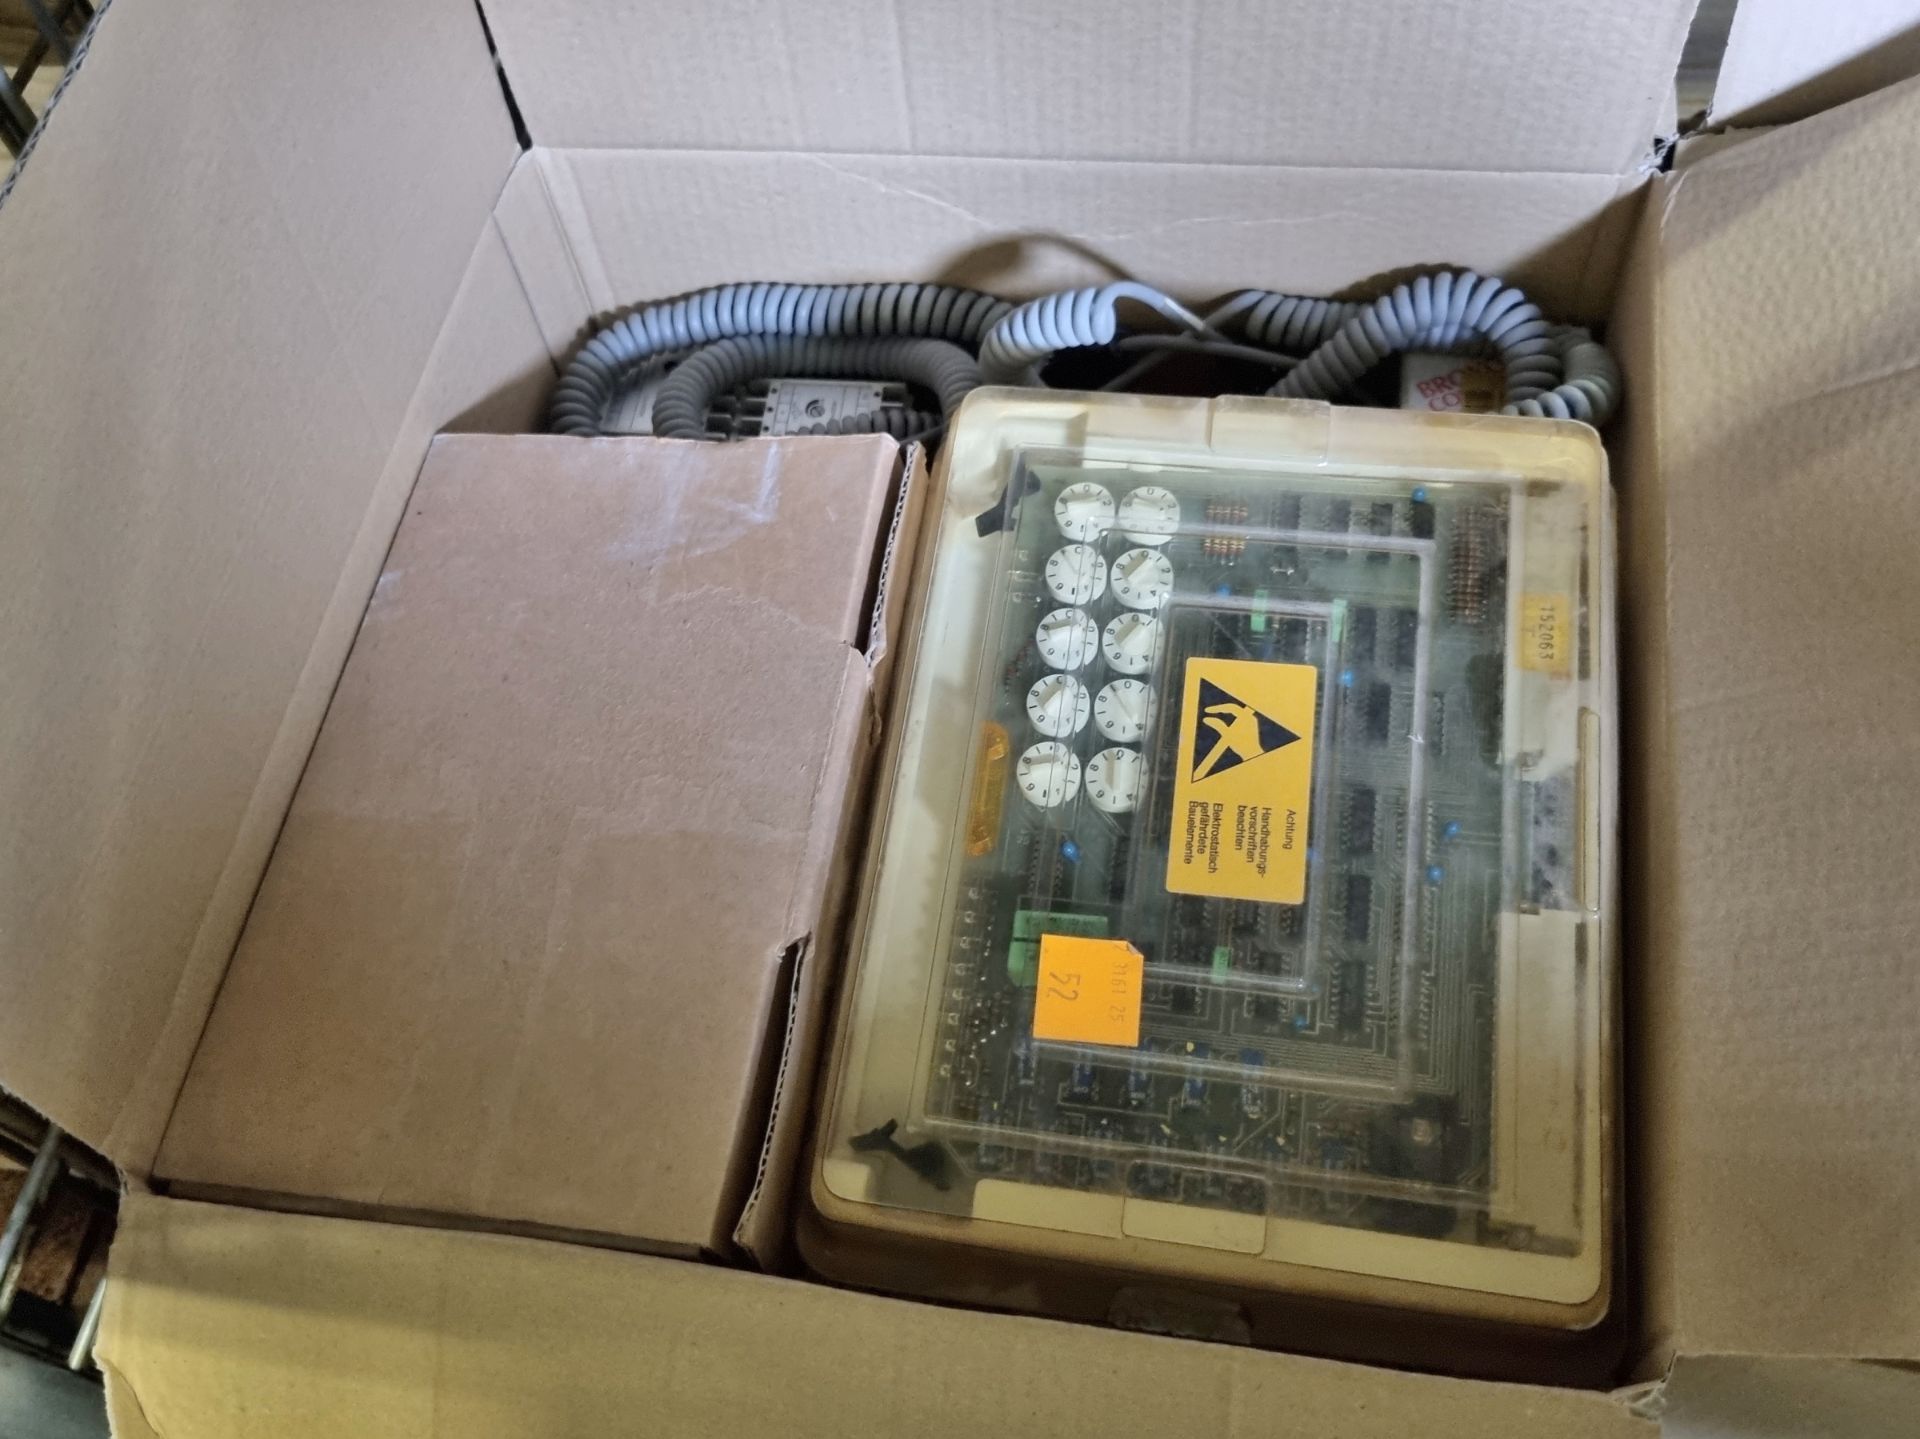 6x boxes of electrical spares - junction boxes - mixed sized switches - circuit boards - Image 6 of 7